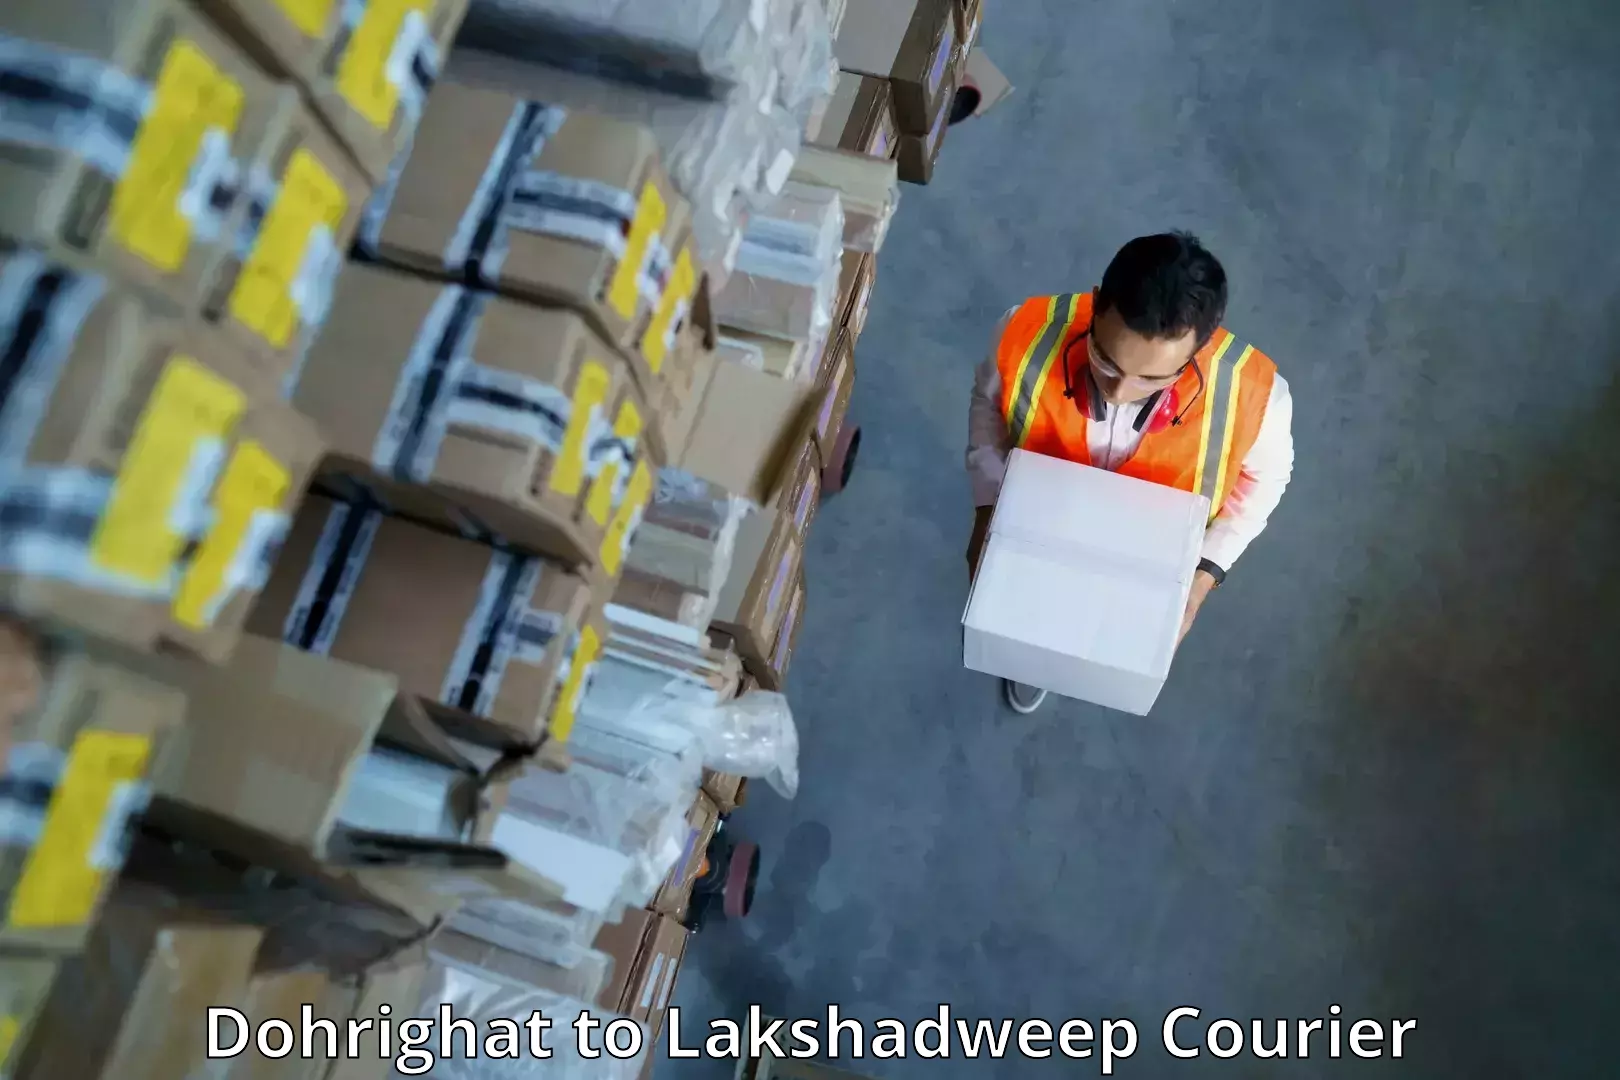 Business delivery service Dohrighat to Lakshadweep